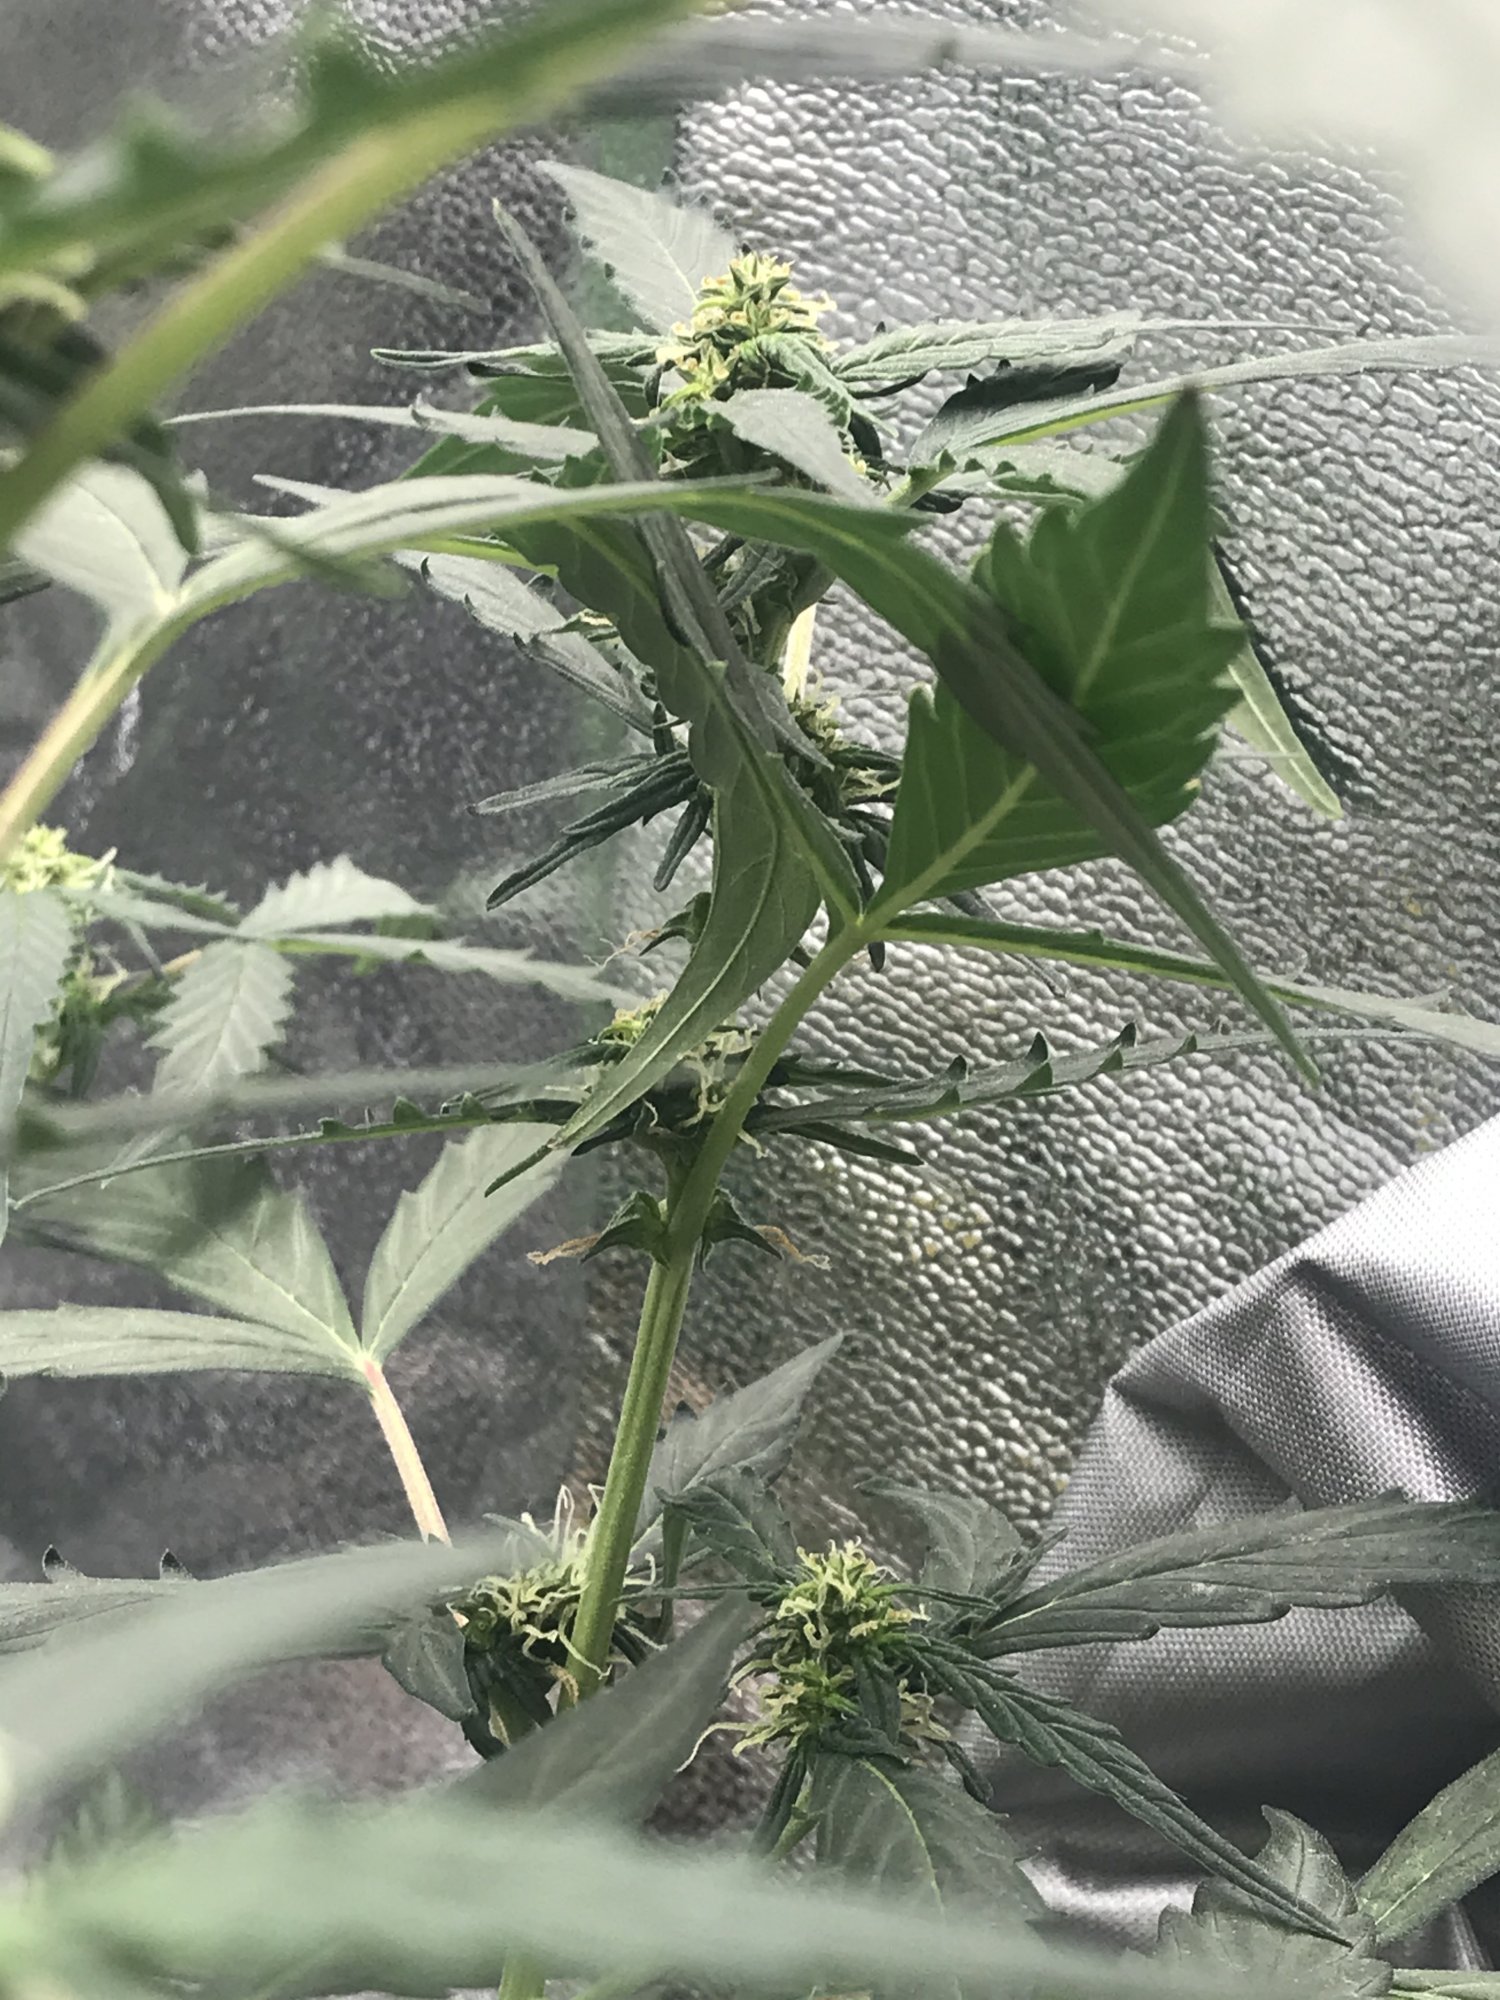 Auto flower seems to have stopped flowering 3